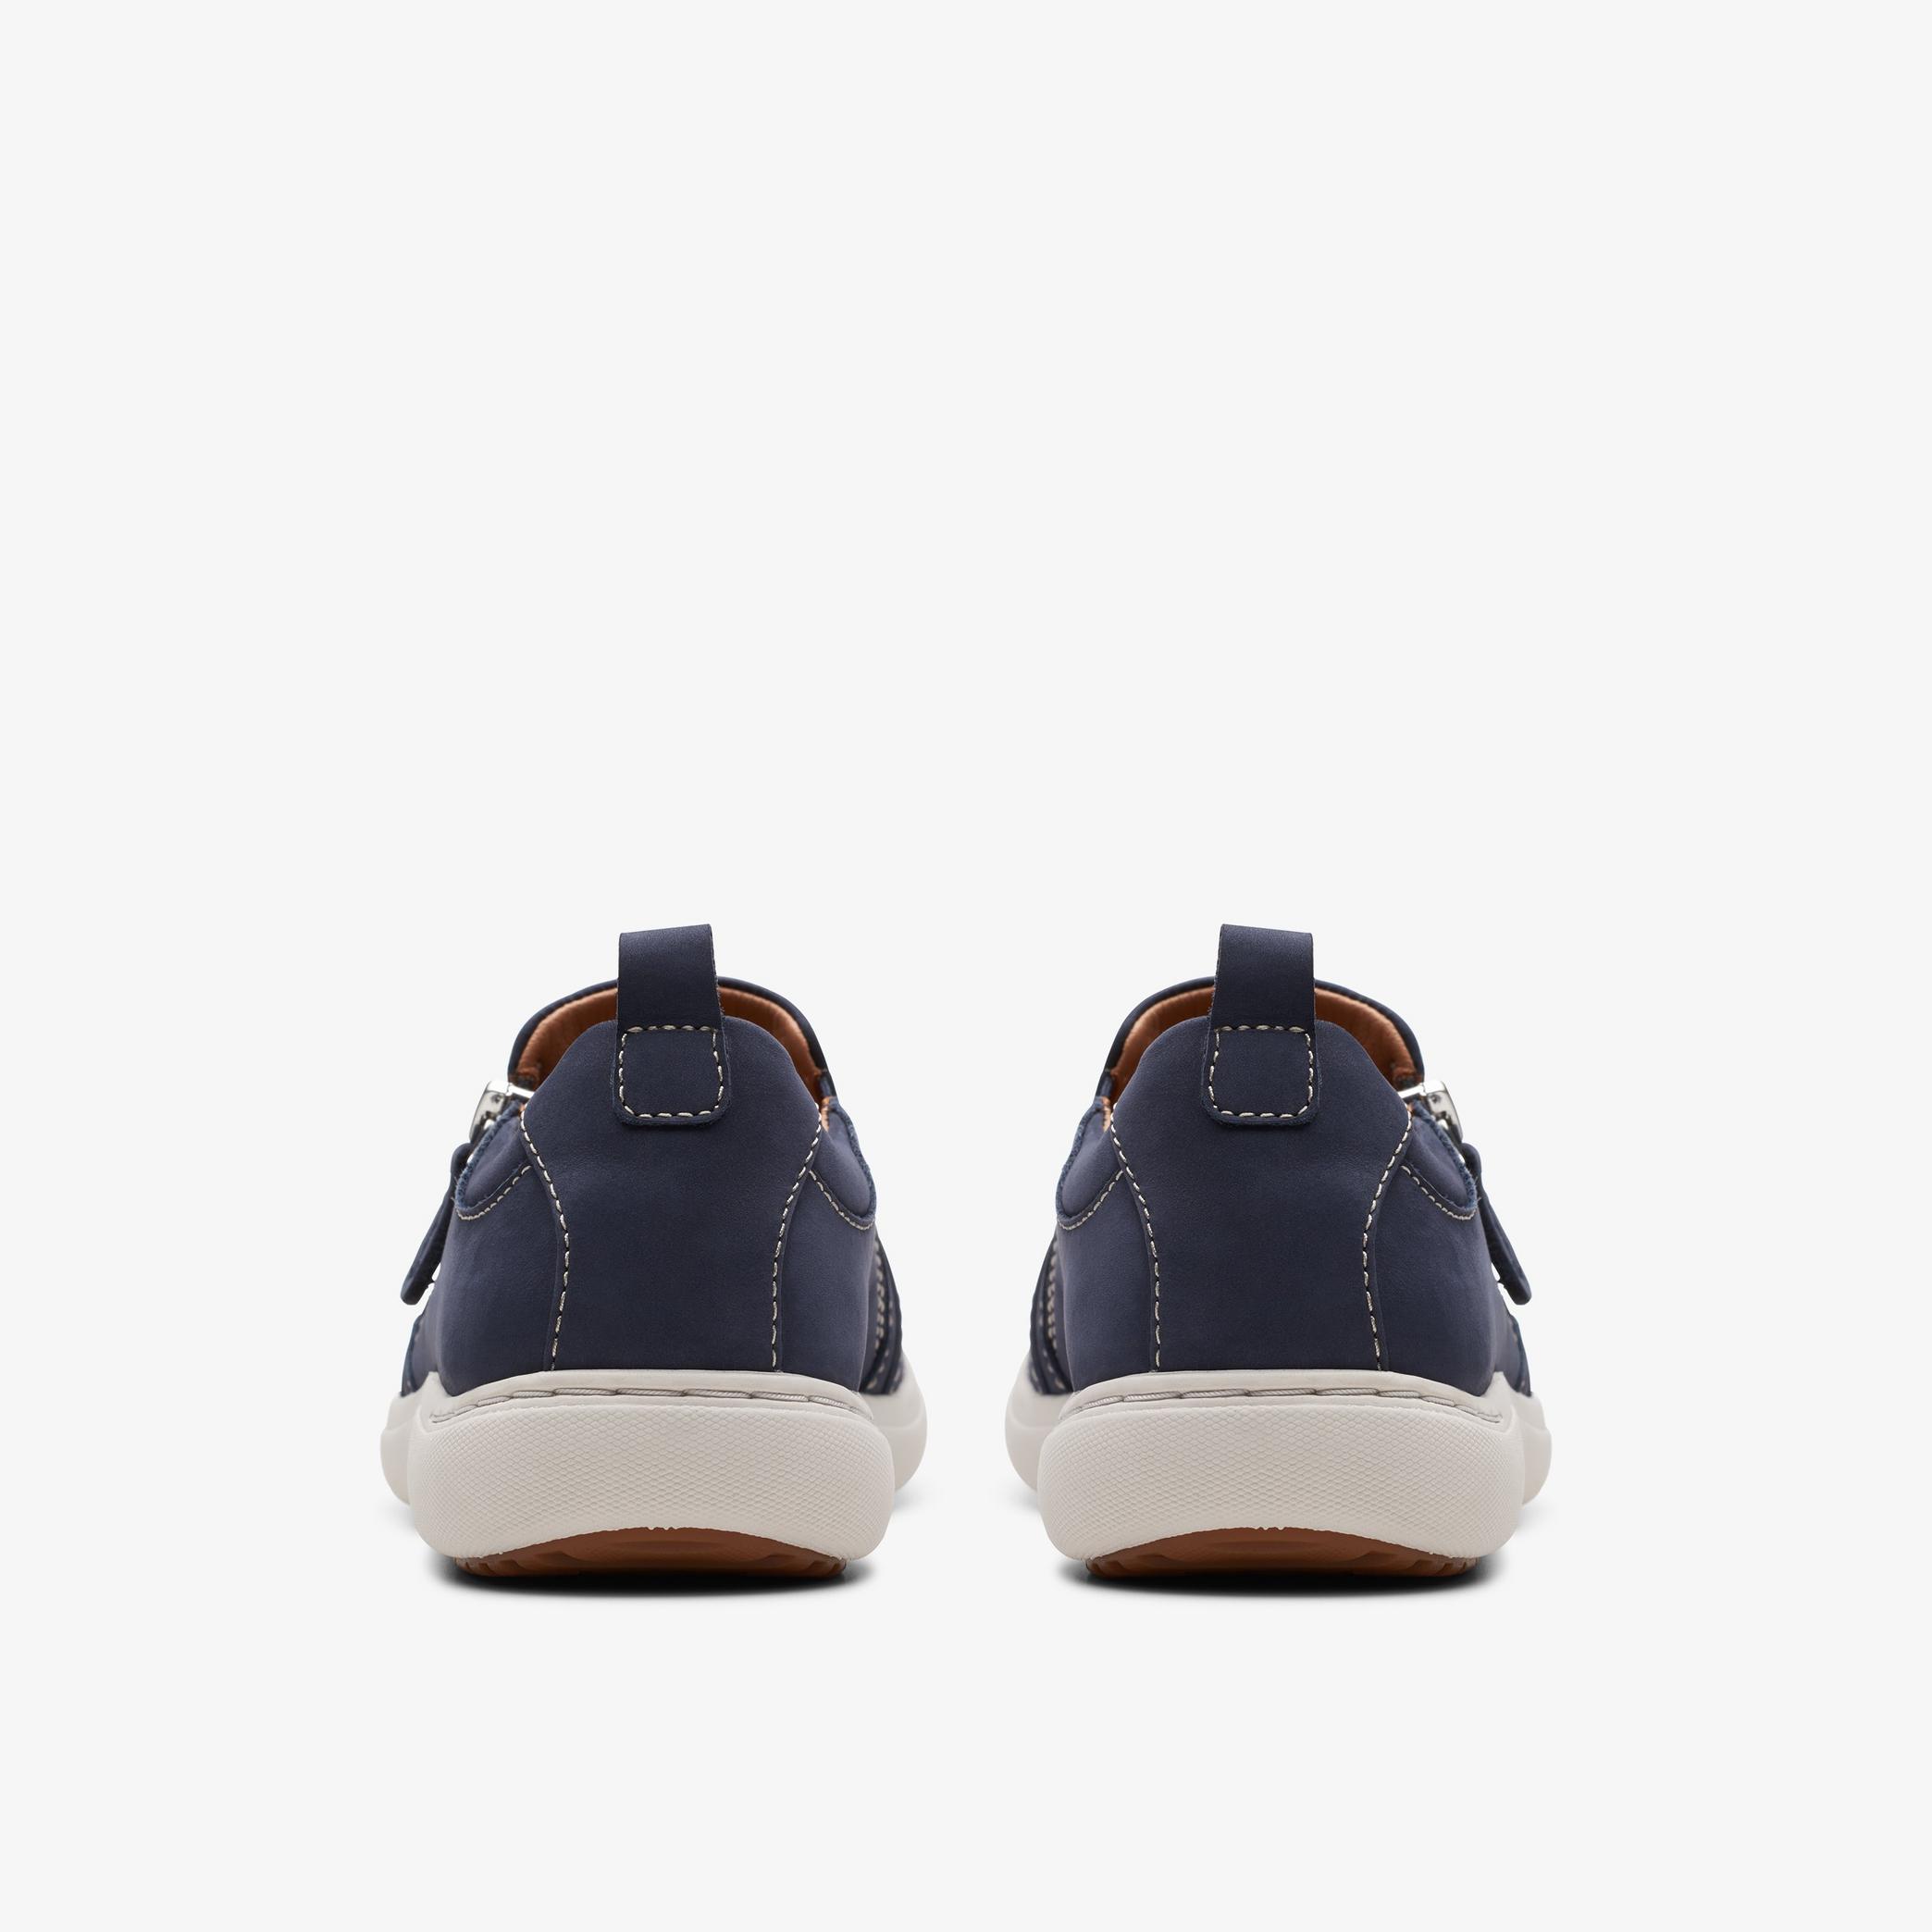 Nalle Lilac Navy Nubuck Sneakers, view 5 of 7